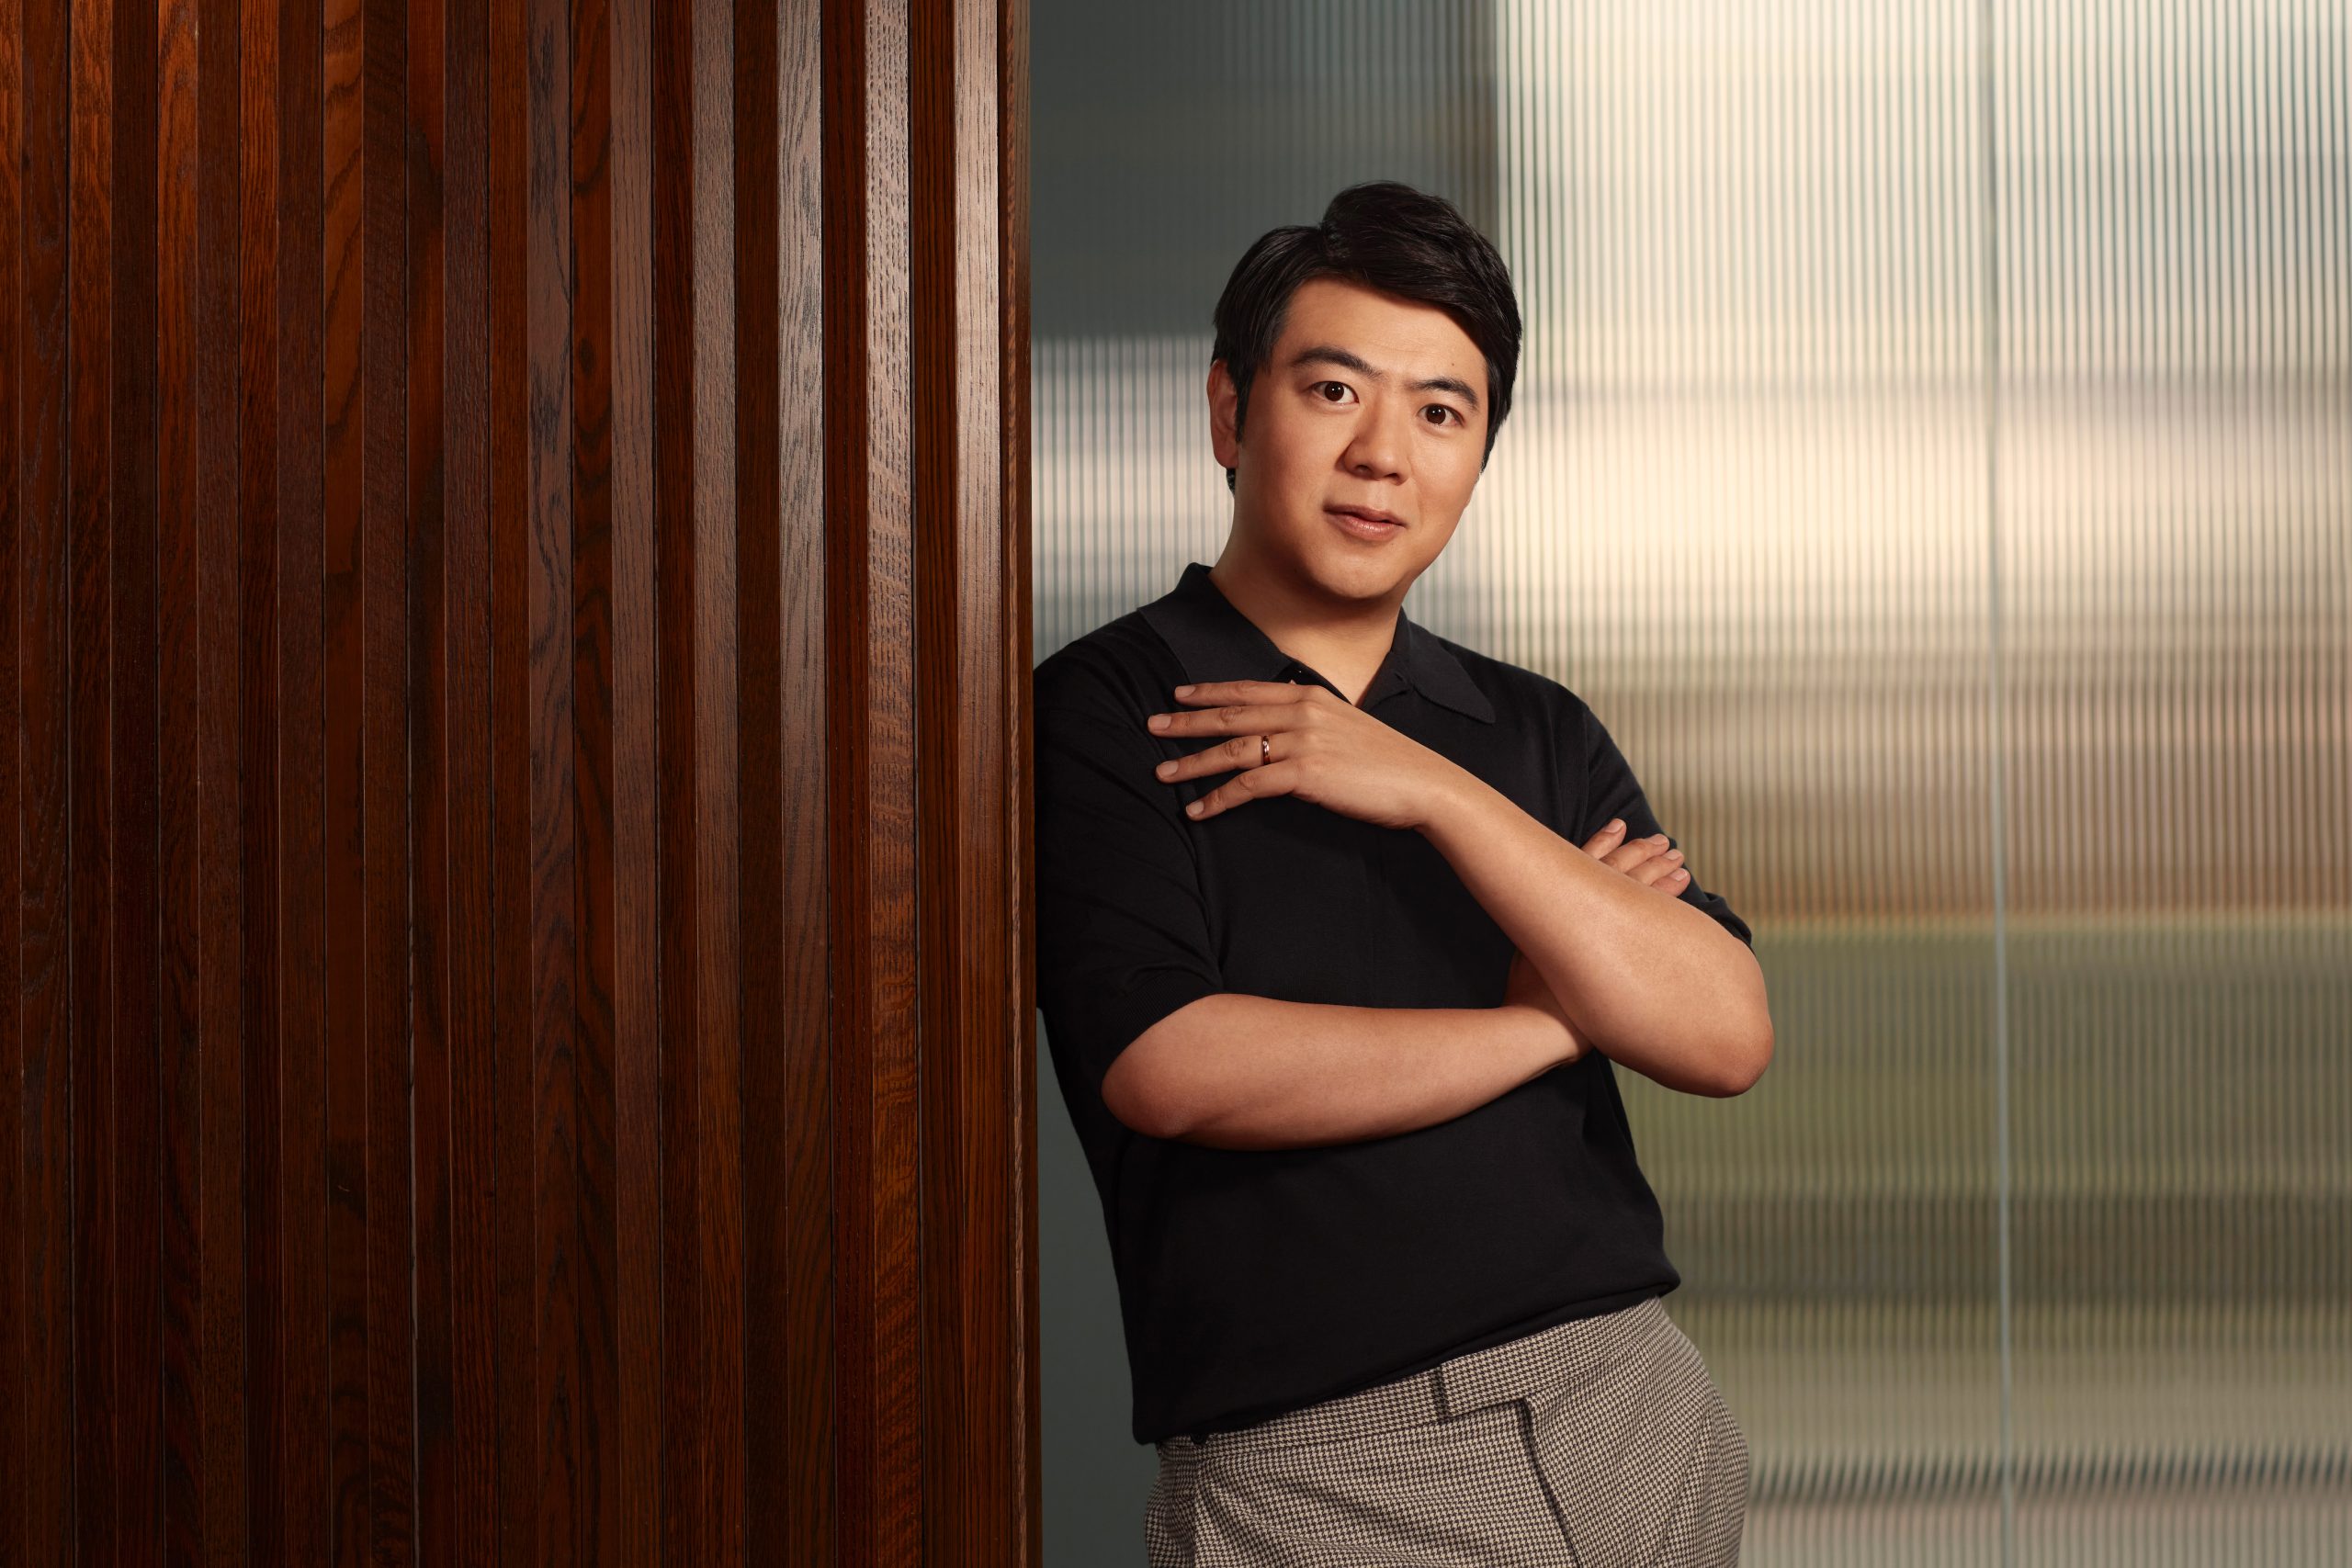 WORLD-RENOWNED CLASSICAL PIANIST LANG LANG TO BE HONORED WITH STAR ON THE HOLLYWOOD WALK OF FAME | FIRST ASIAN PIANIST TO RECEIVE A STAR ON THE ICONIC SIDEWALK - Hollywood Walk of Fame